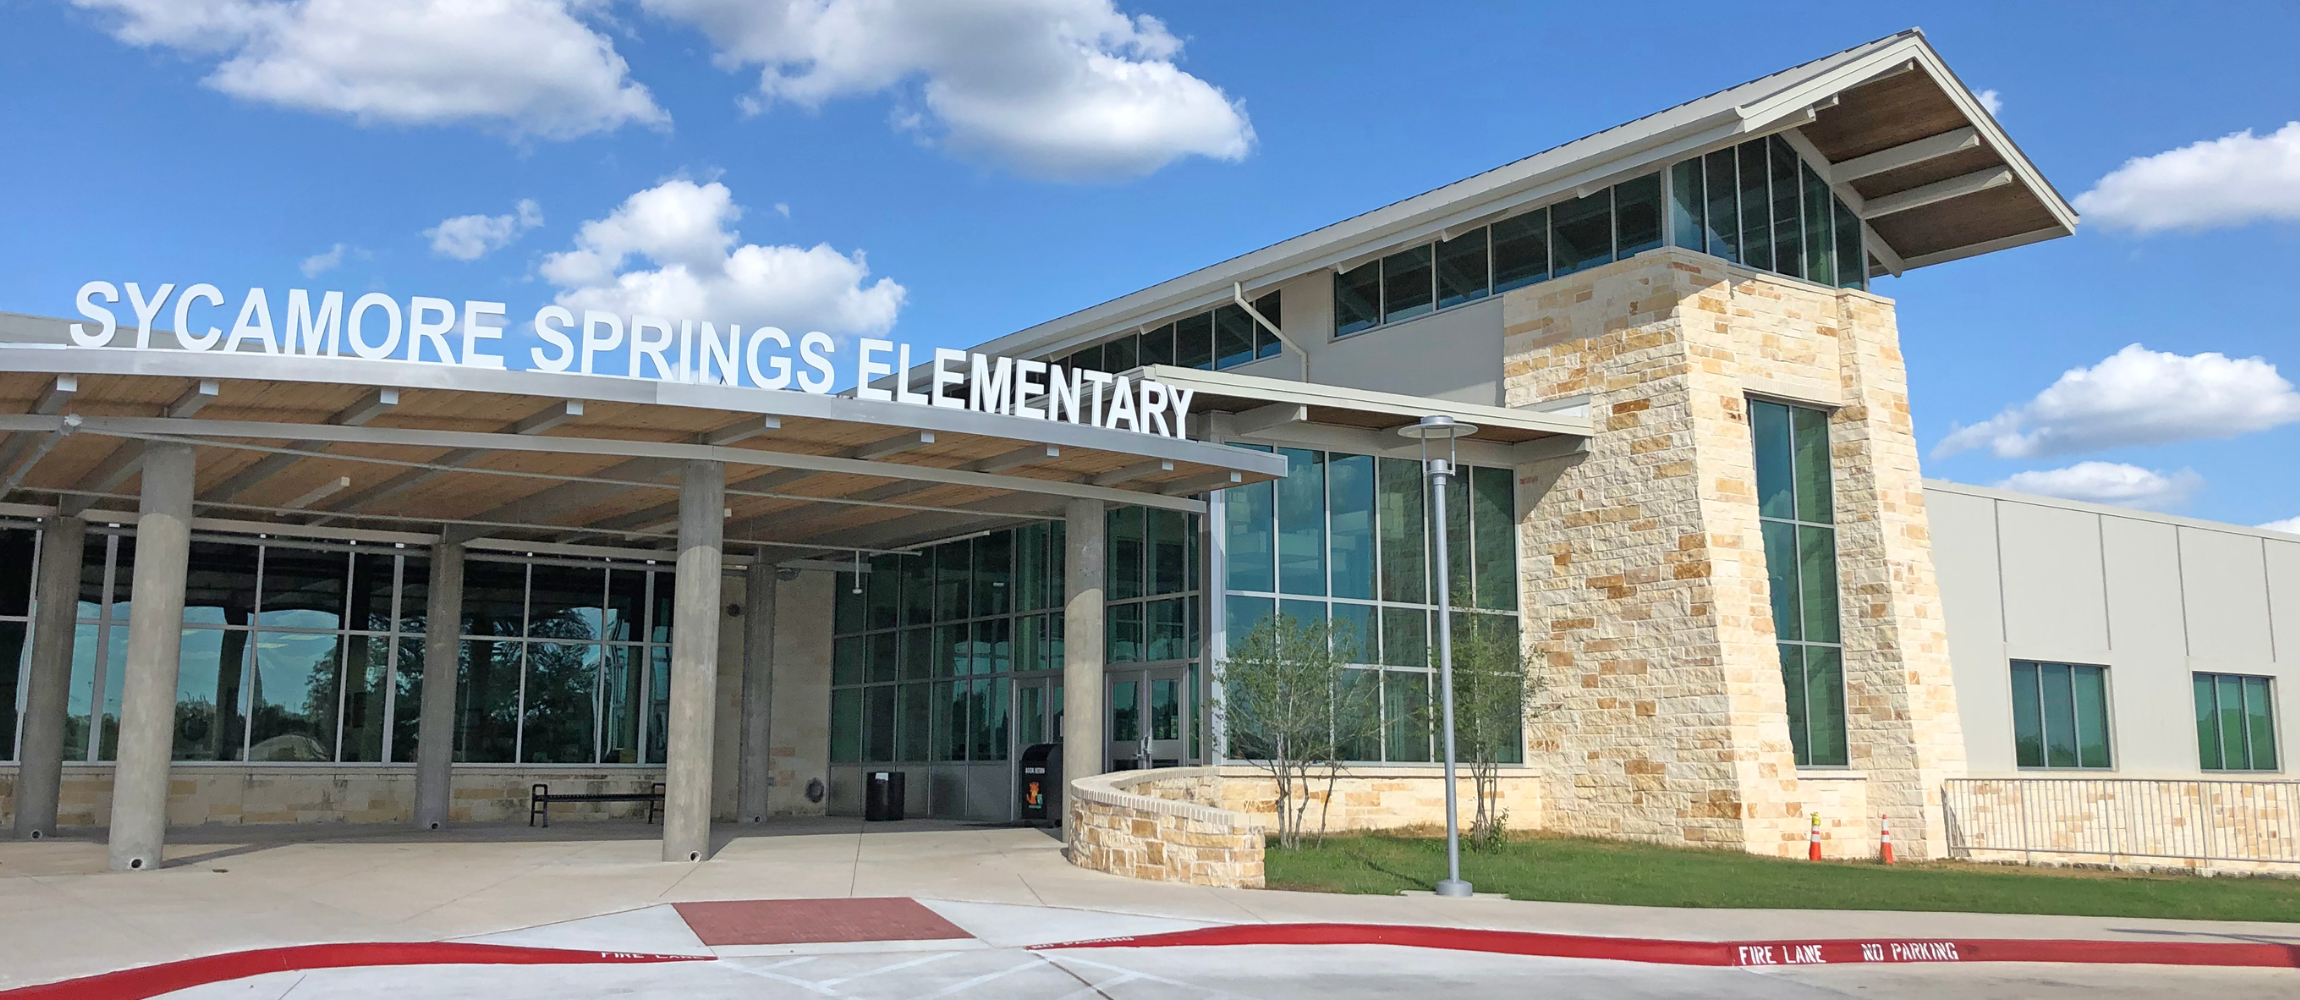 Sycamore Springs Elementary